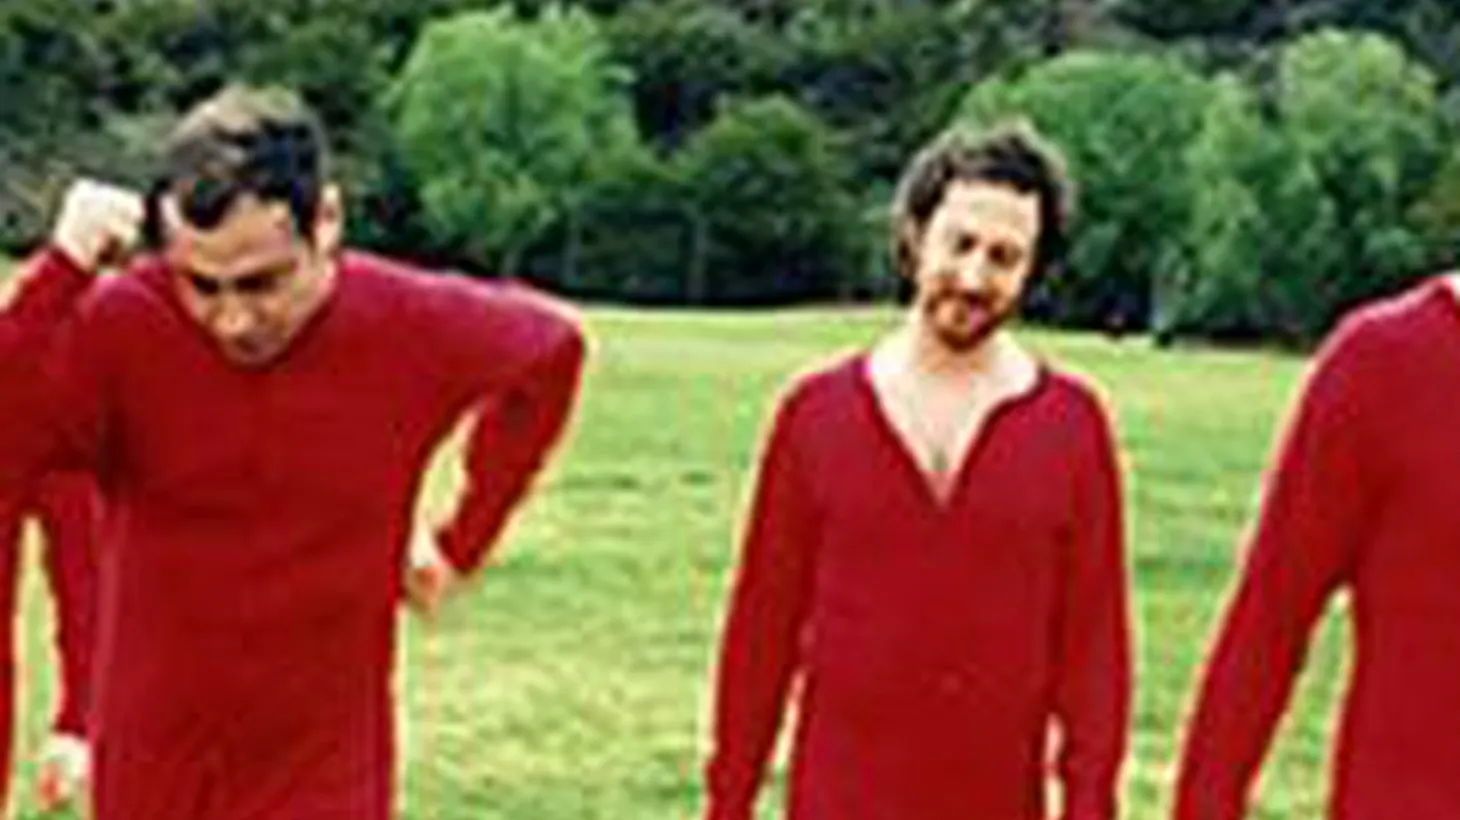 Boston based trio, Guster, bring good, clean fun to Morning Becomes Eclectic listeners at 11:15am. Click Here to Watch!